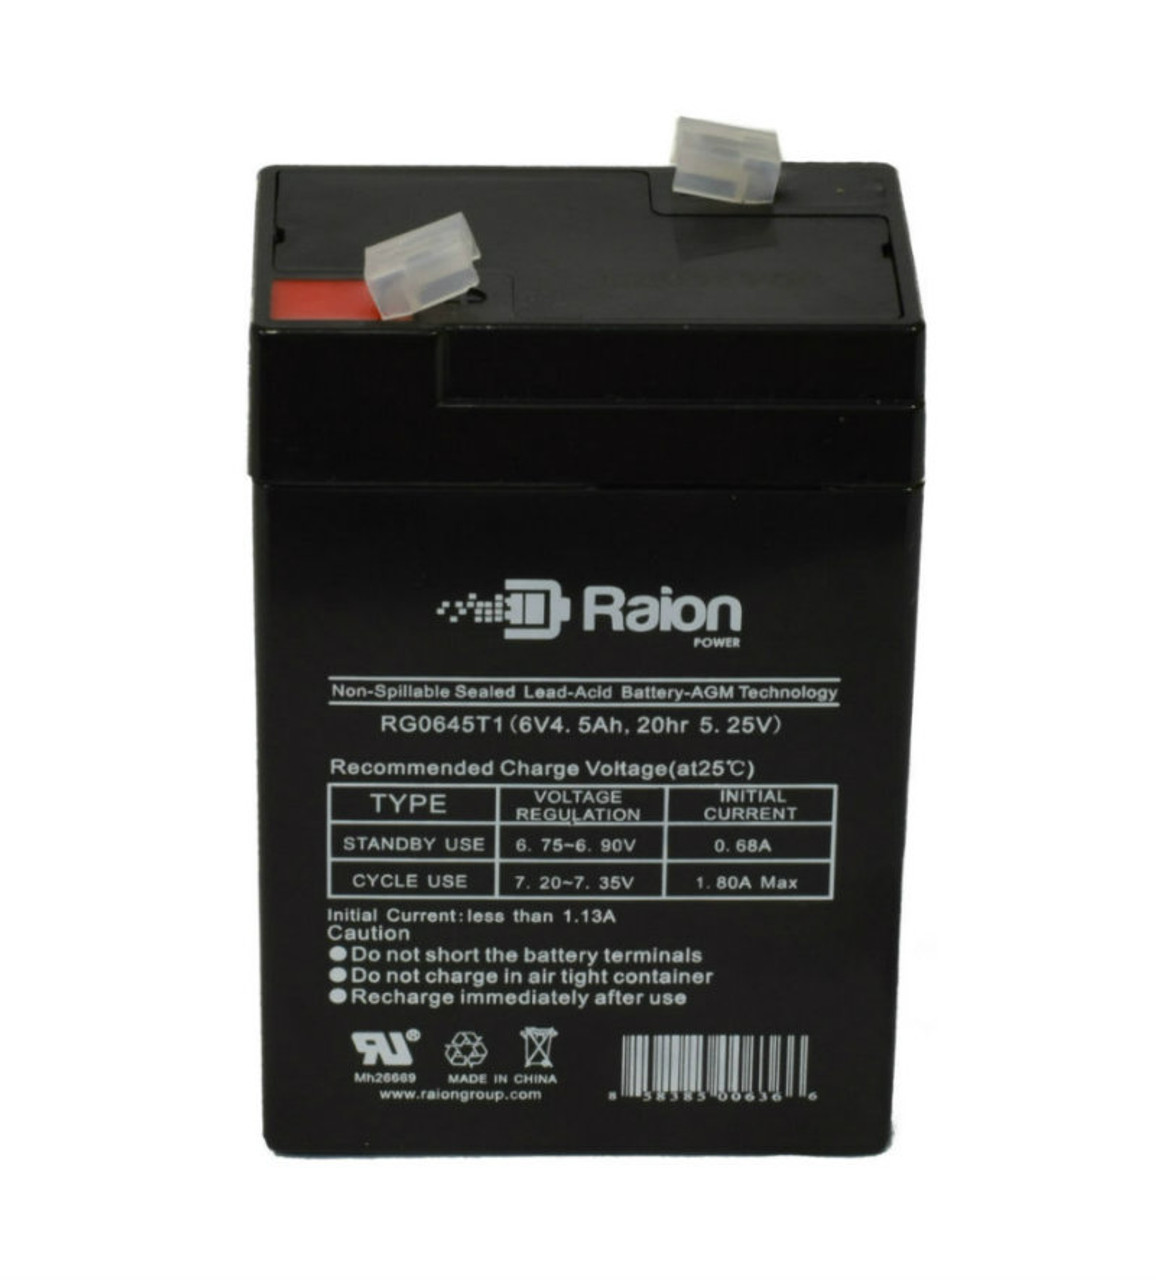 Raion Power RG0645T1 Replacement Battery Cartridge for Narada 3-FM-4.2